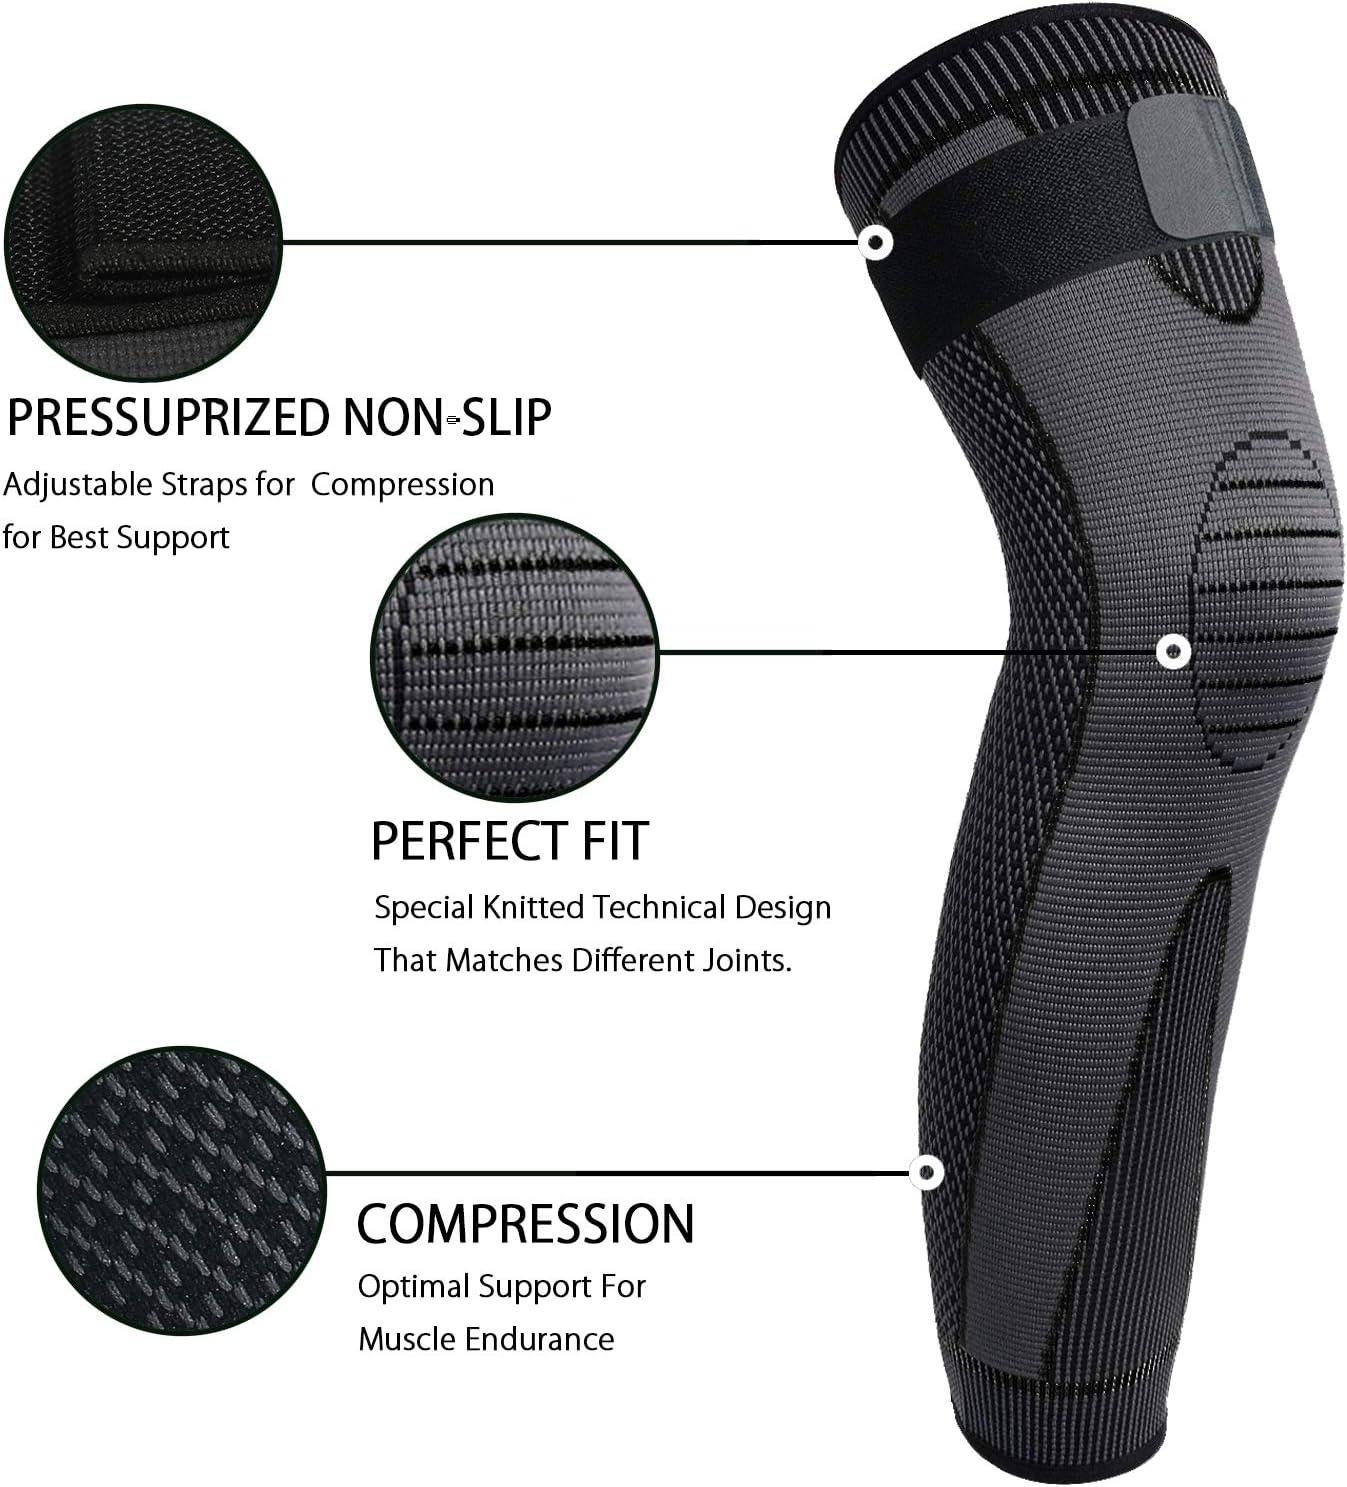 Full Leg Sleeves Long Compression Leg Sleeve Knee Sleeves Protect Leg, for  Basketball, Reduce Varicose Veins and Swelling of Legs 